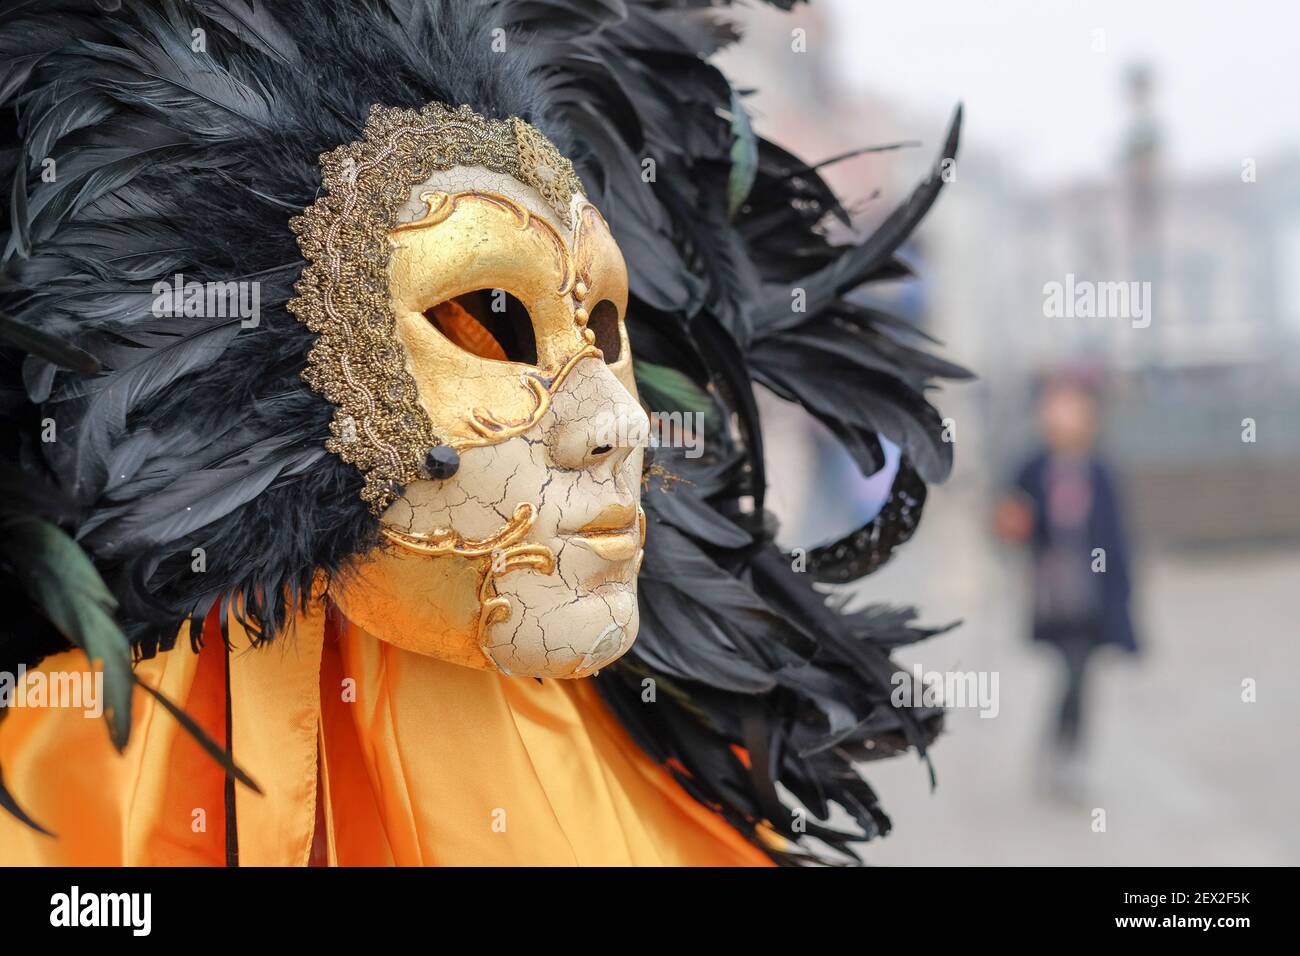 Venetian Masquerade Mask, carnival mask on sale in Venice, Italy. Crackled porcelain face mask surrounded by a plume of black feathers Stock Photo